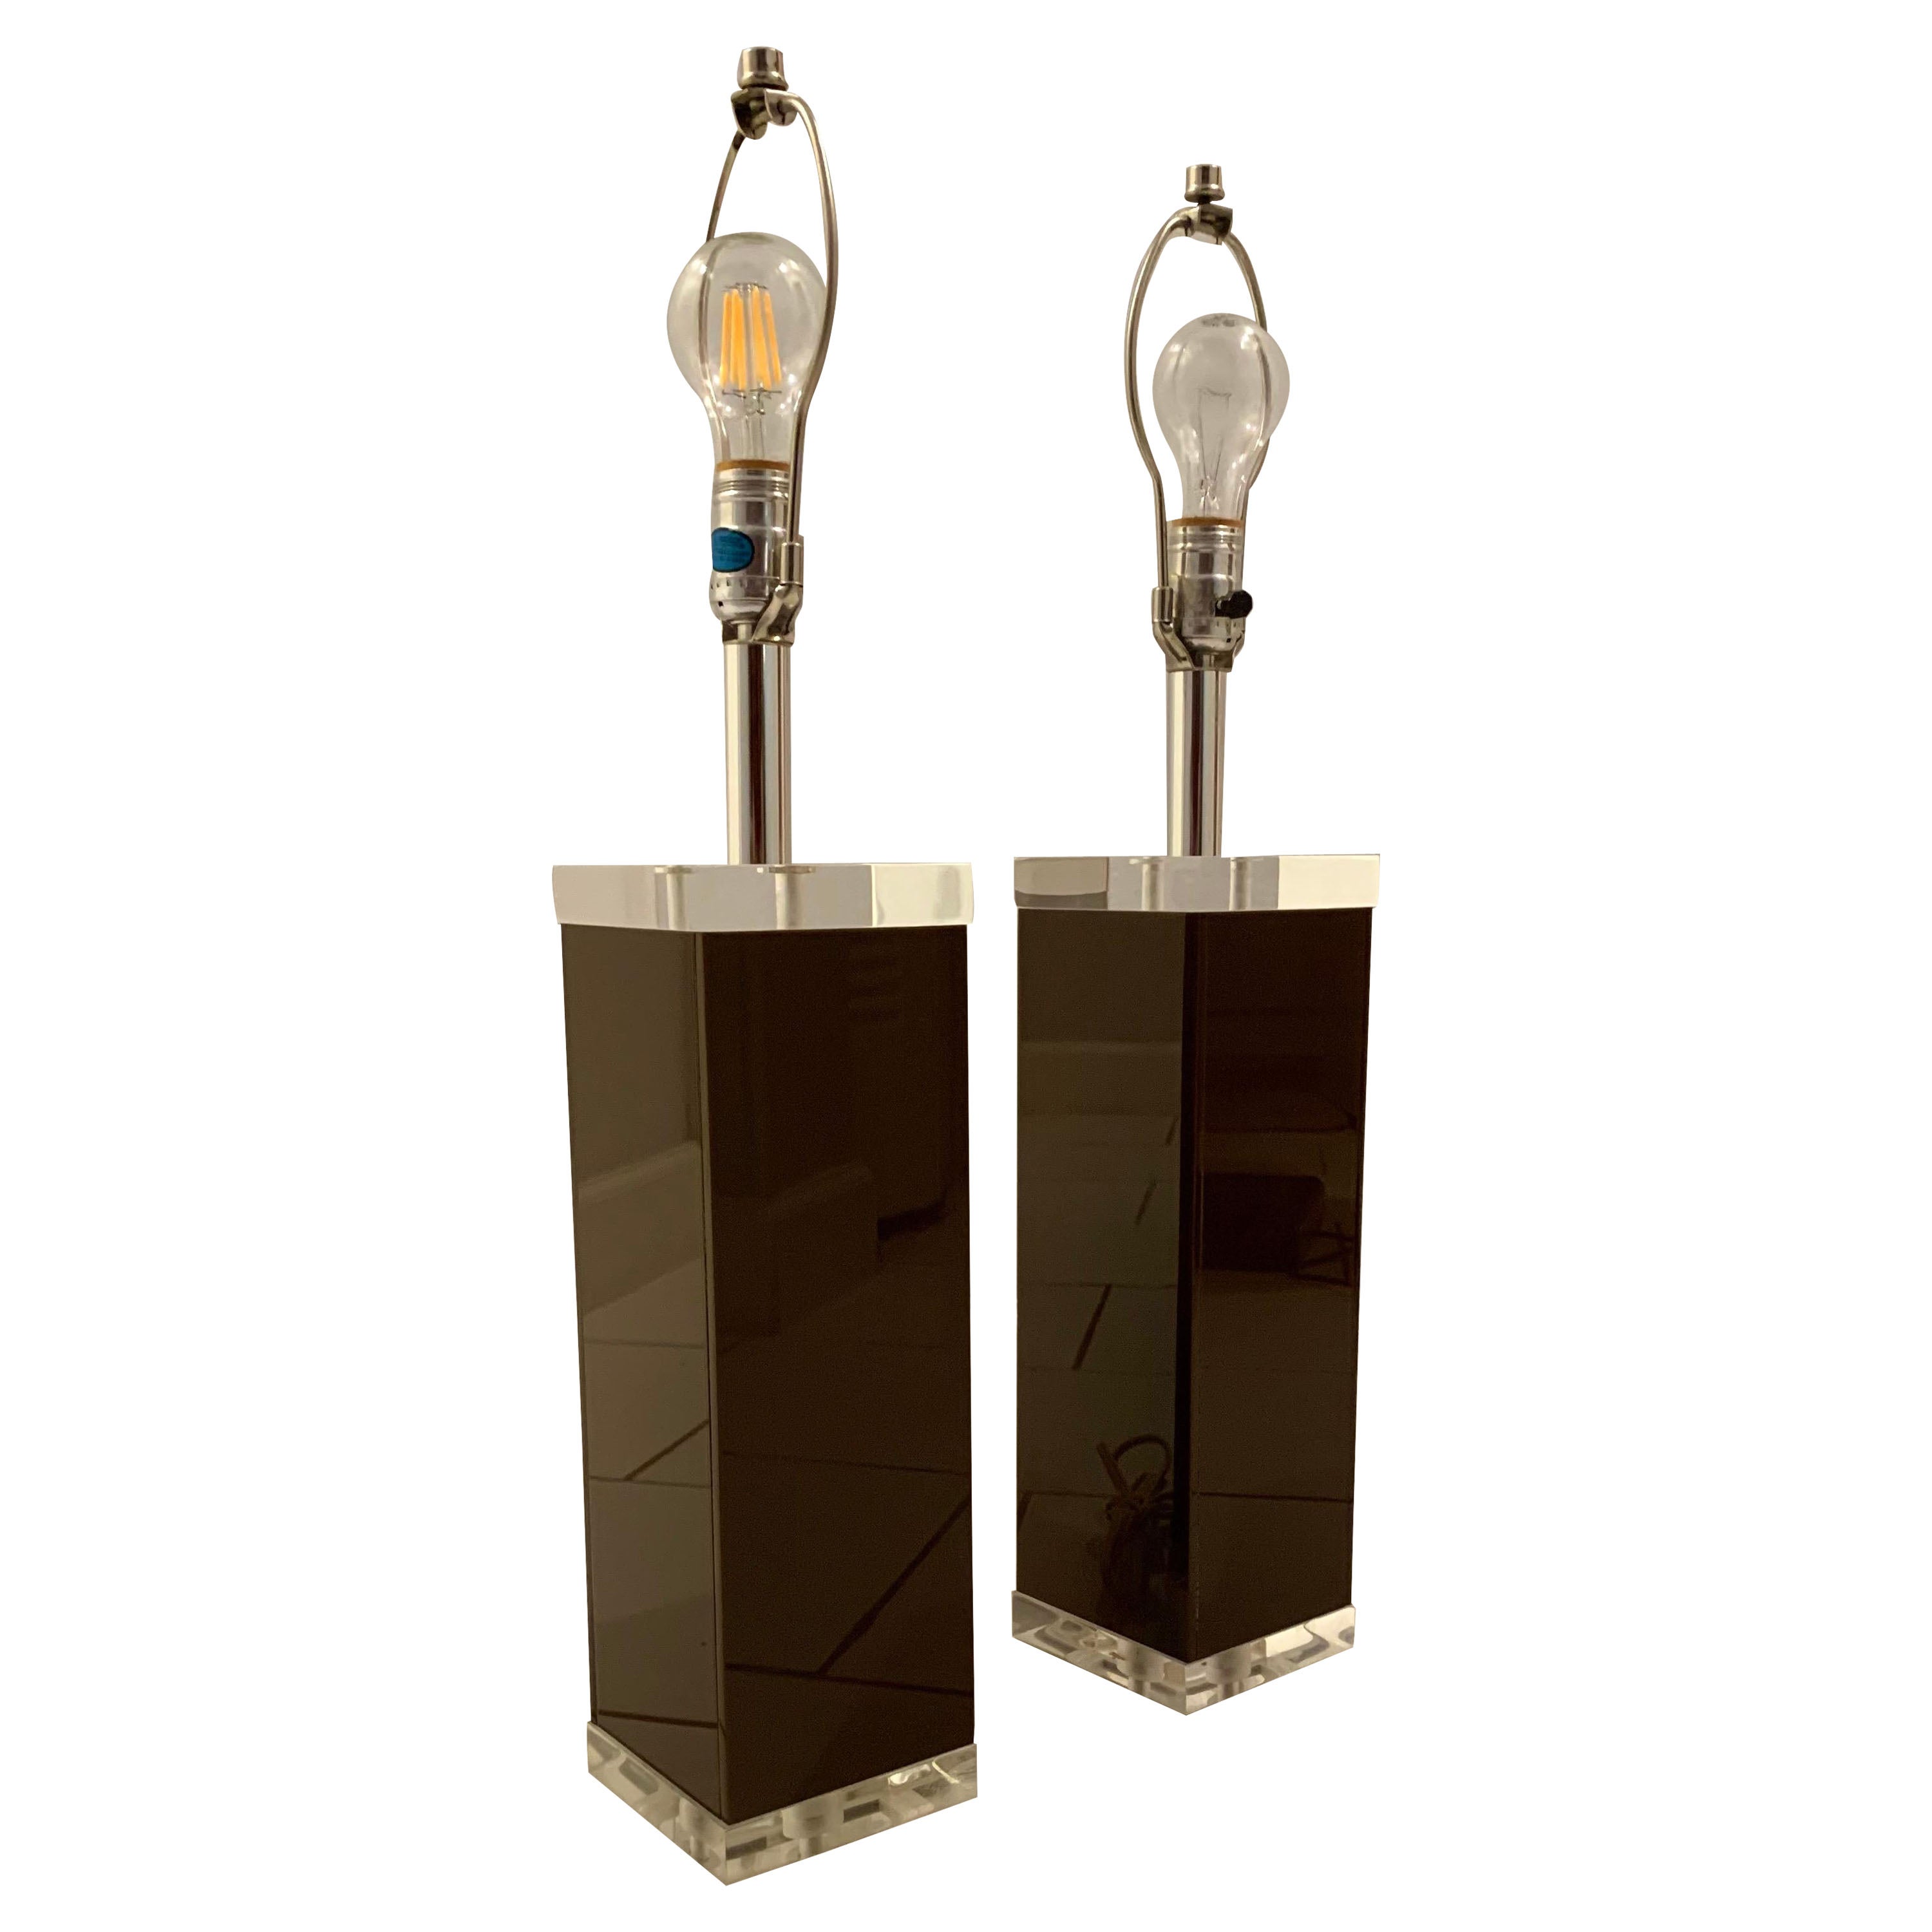 George Bullio Lucite Lamps in Brown and Clear, a Pair For Sale